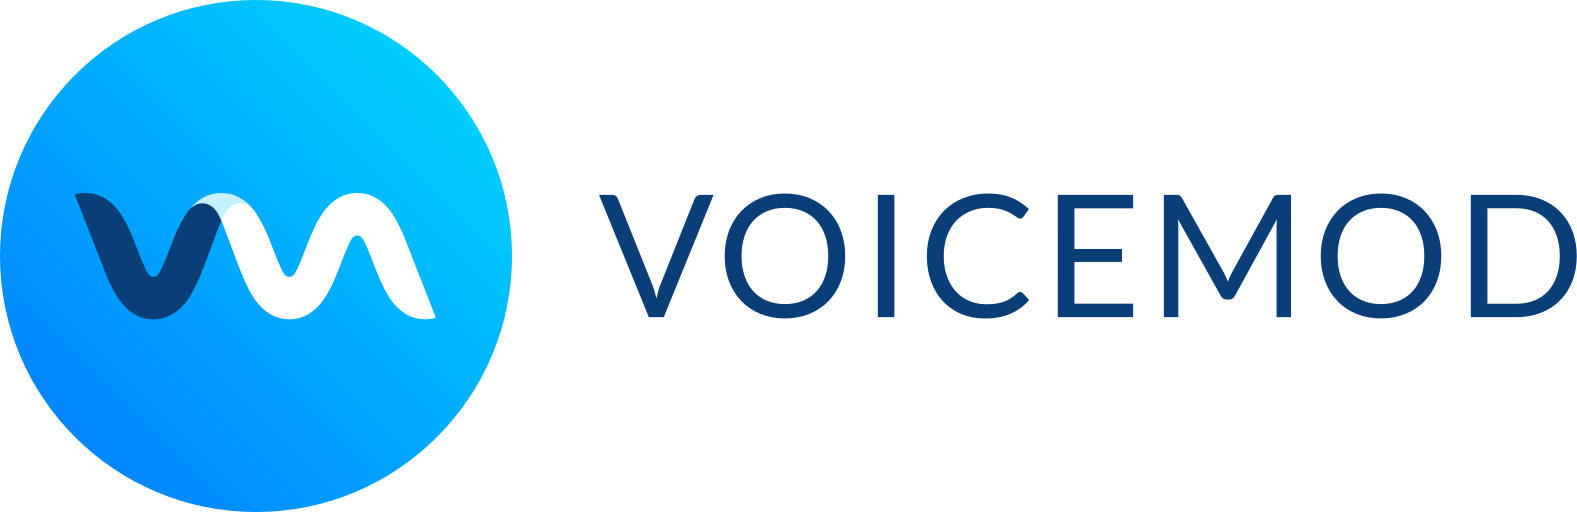 voicemod pro license key email